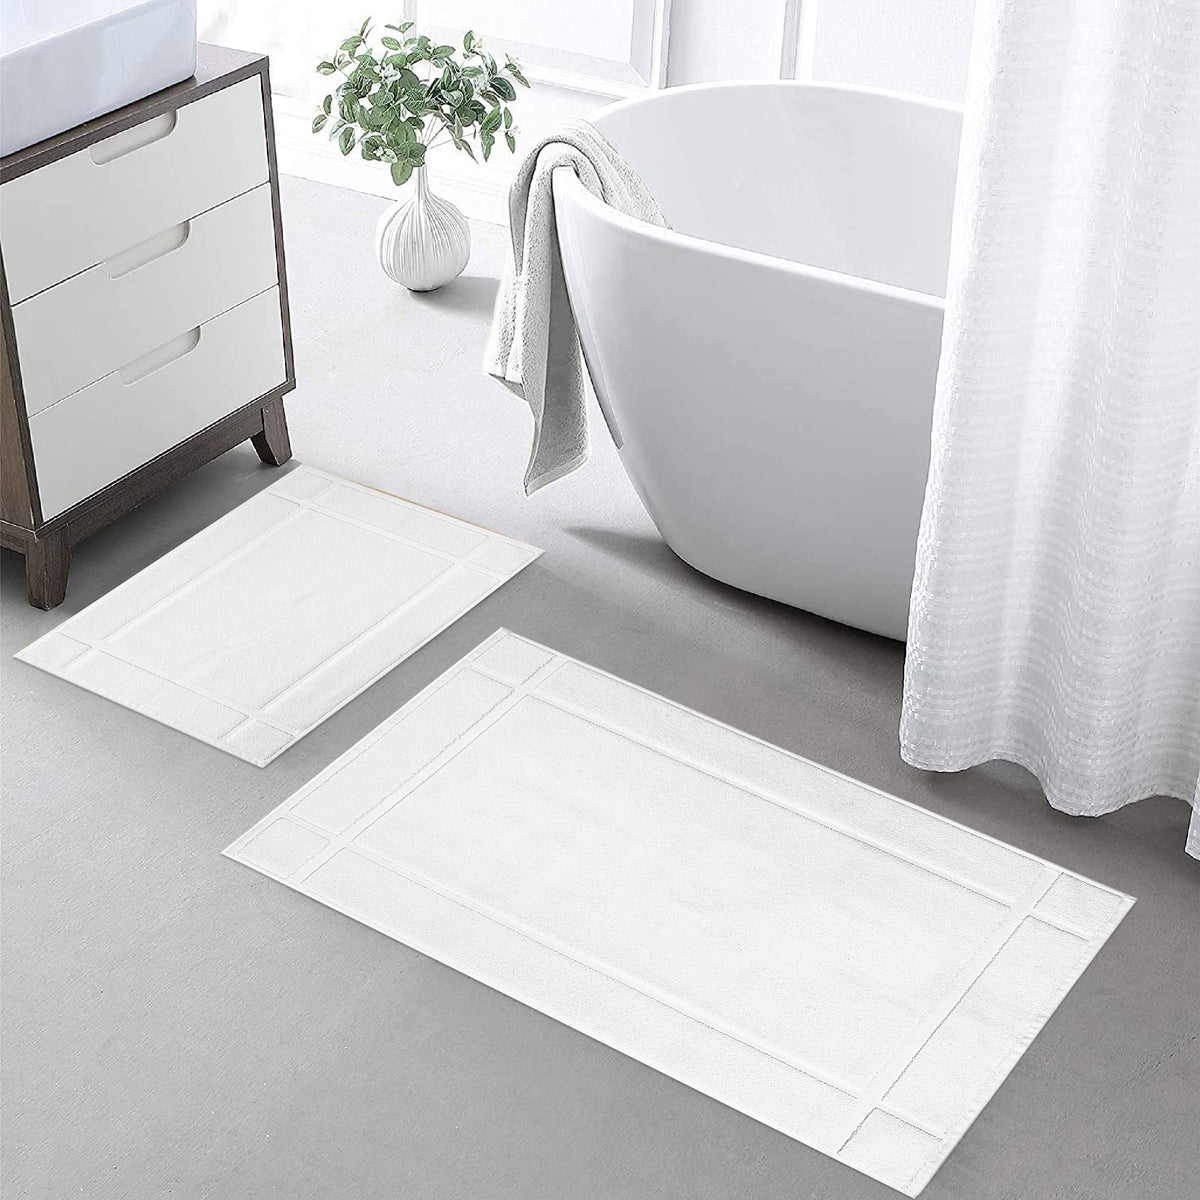 Set of 2 24"X17" & 34"X20" Cotton Bath Mats 1350 GSM Solid Thick & Plush, for Bathroom Floor